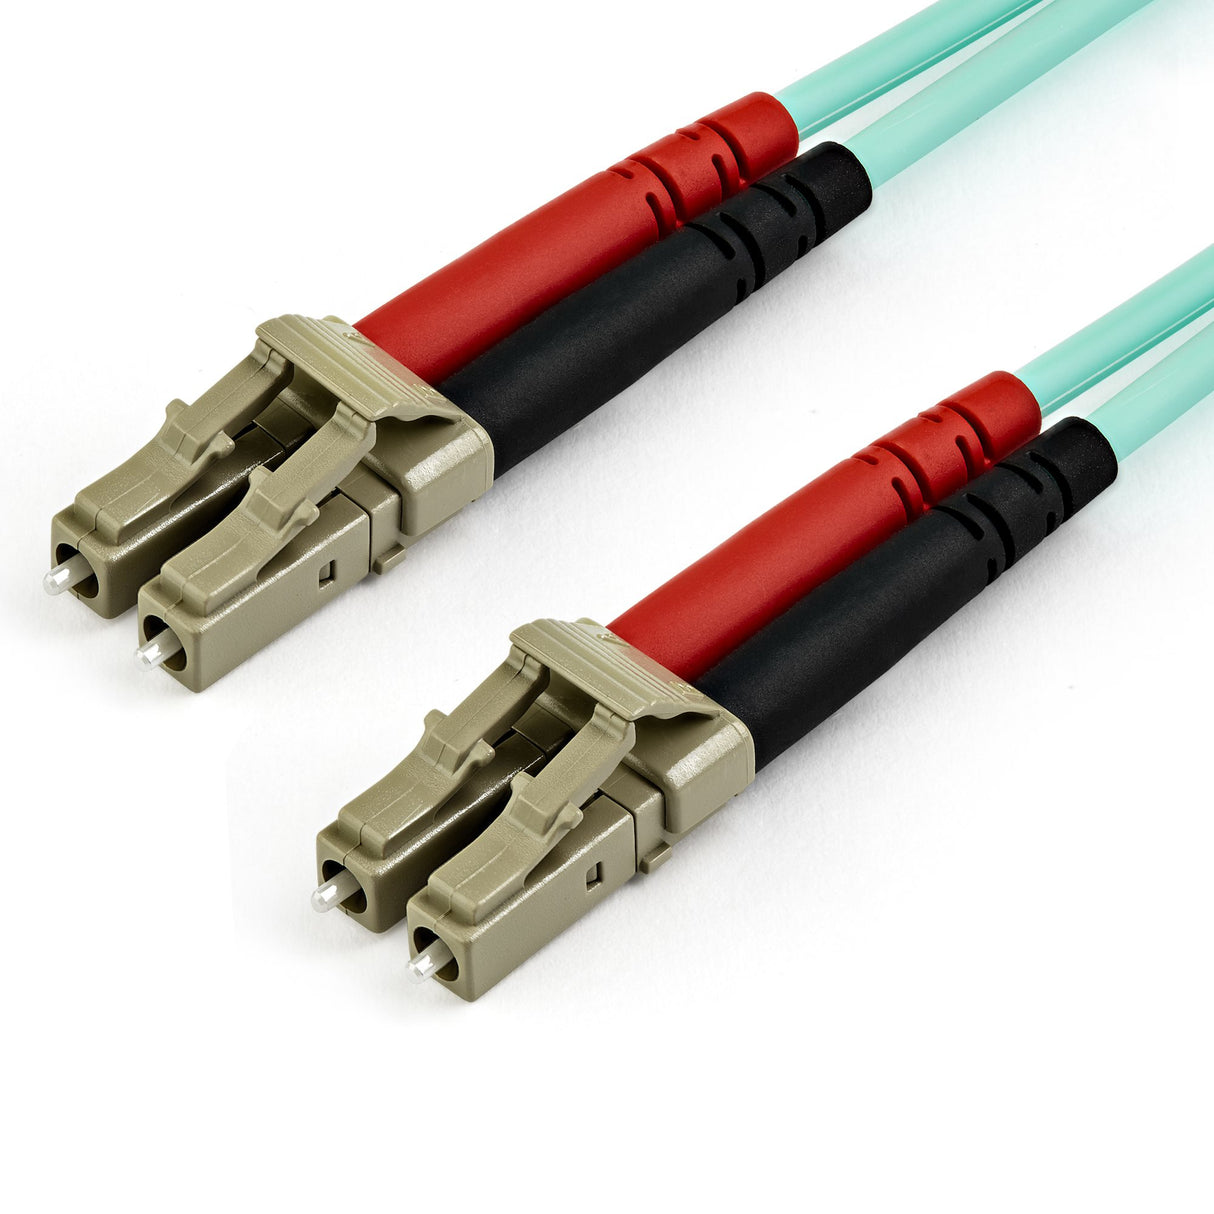 STARTECH 15m (50ft) LC|UPC to LC|UPC OM3 Multimode Fiber Optic Cable | Full Duplex 50|125µm Zipcord | 100G Networks | LOMMF|VCSEL | Below 0.3dB Insertion Loss | LSZH Fiber Patch Cord (A50FBLCLC15) (A50FBLCLC15) STARTECH